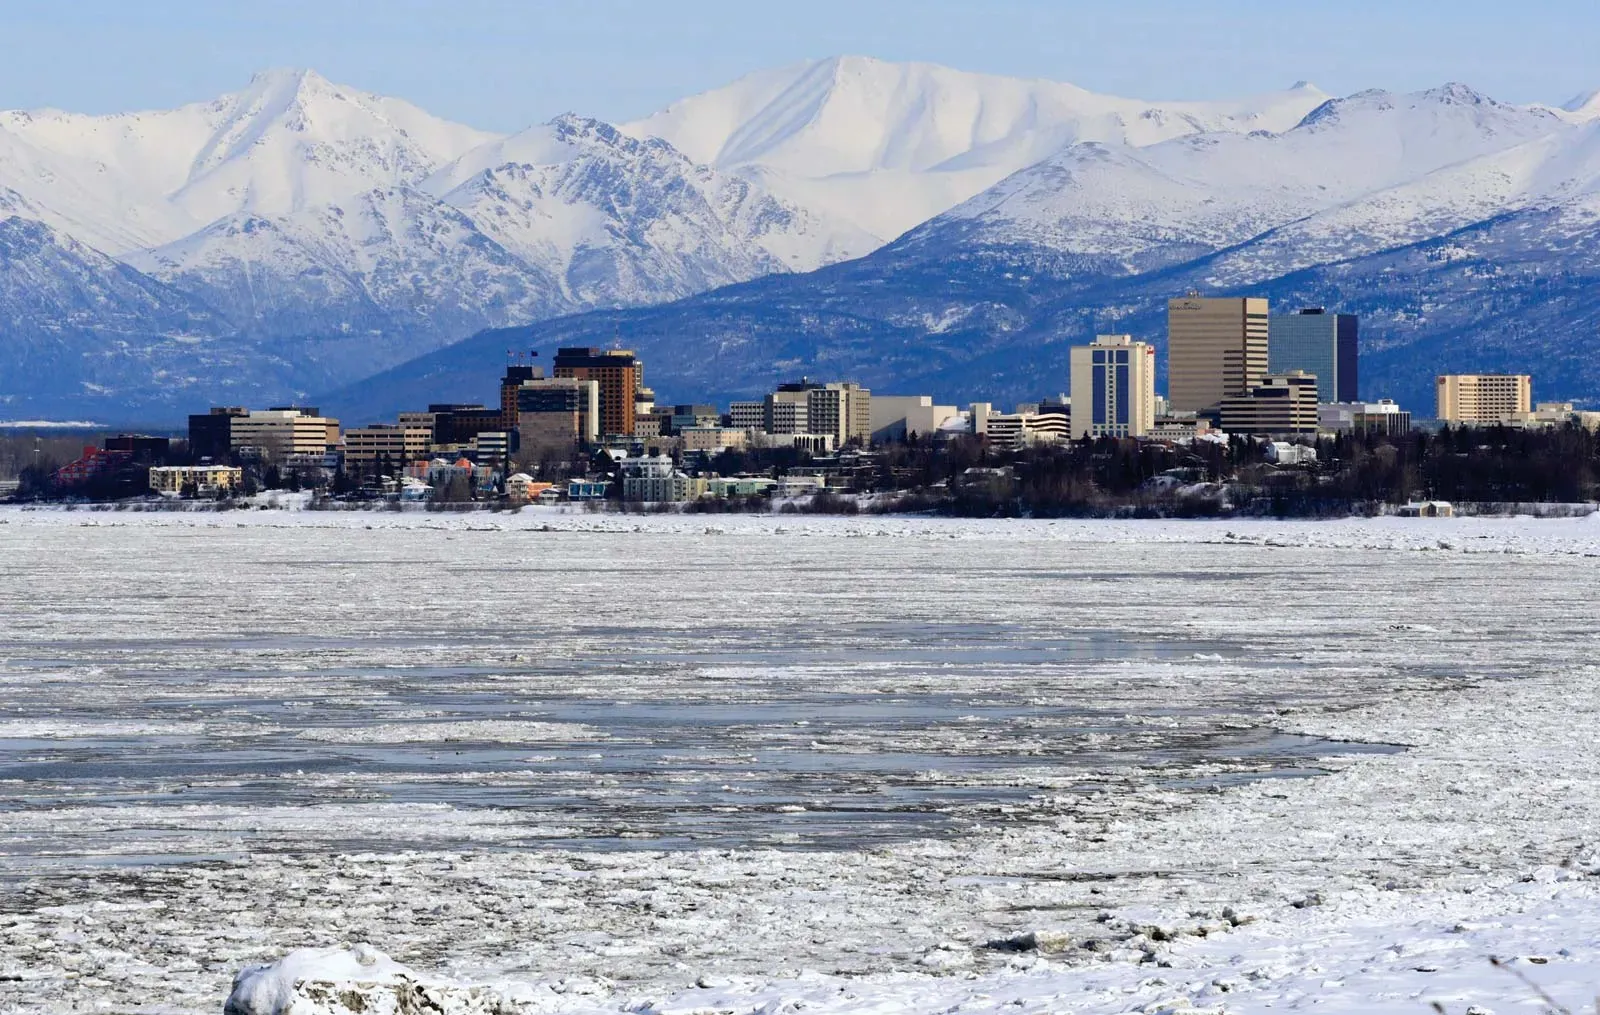 Anchorage, Alaska City Named “Most Corrupt Town in The State”